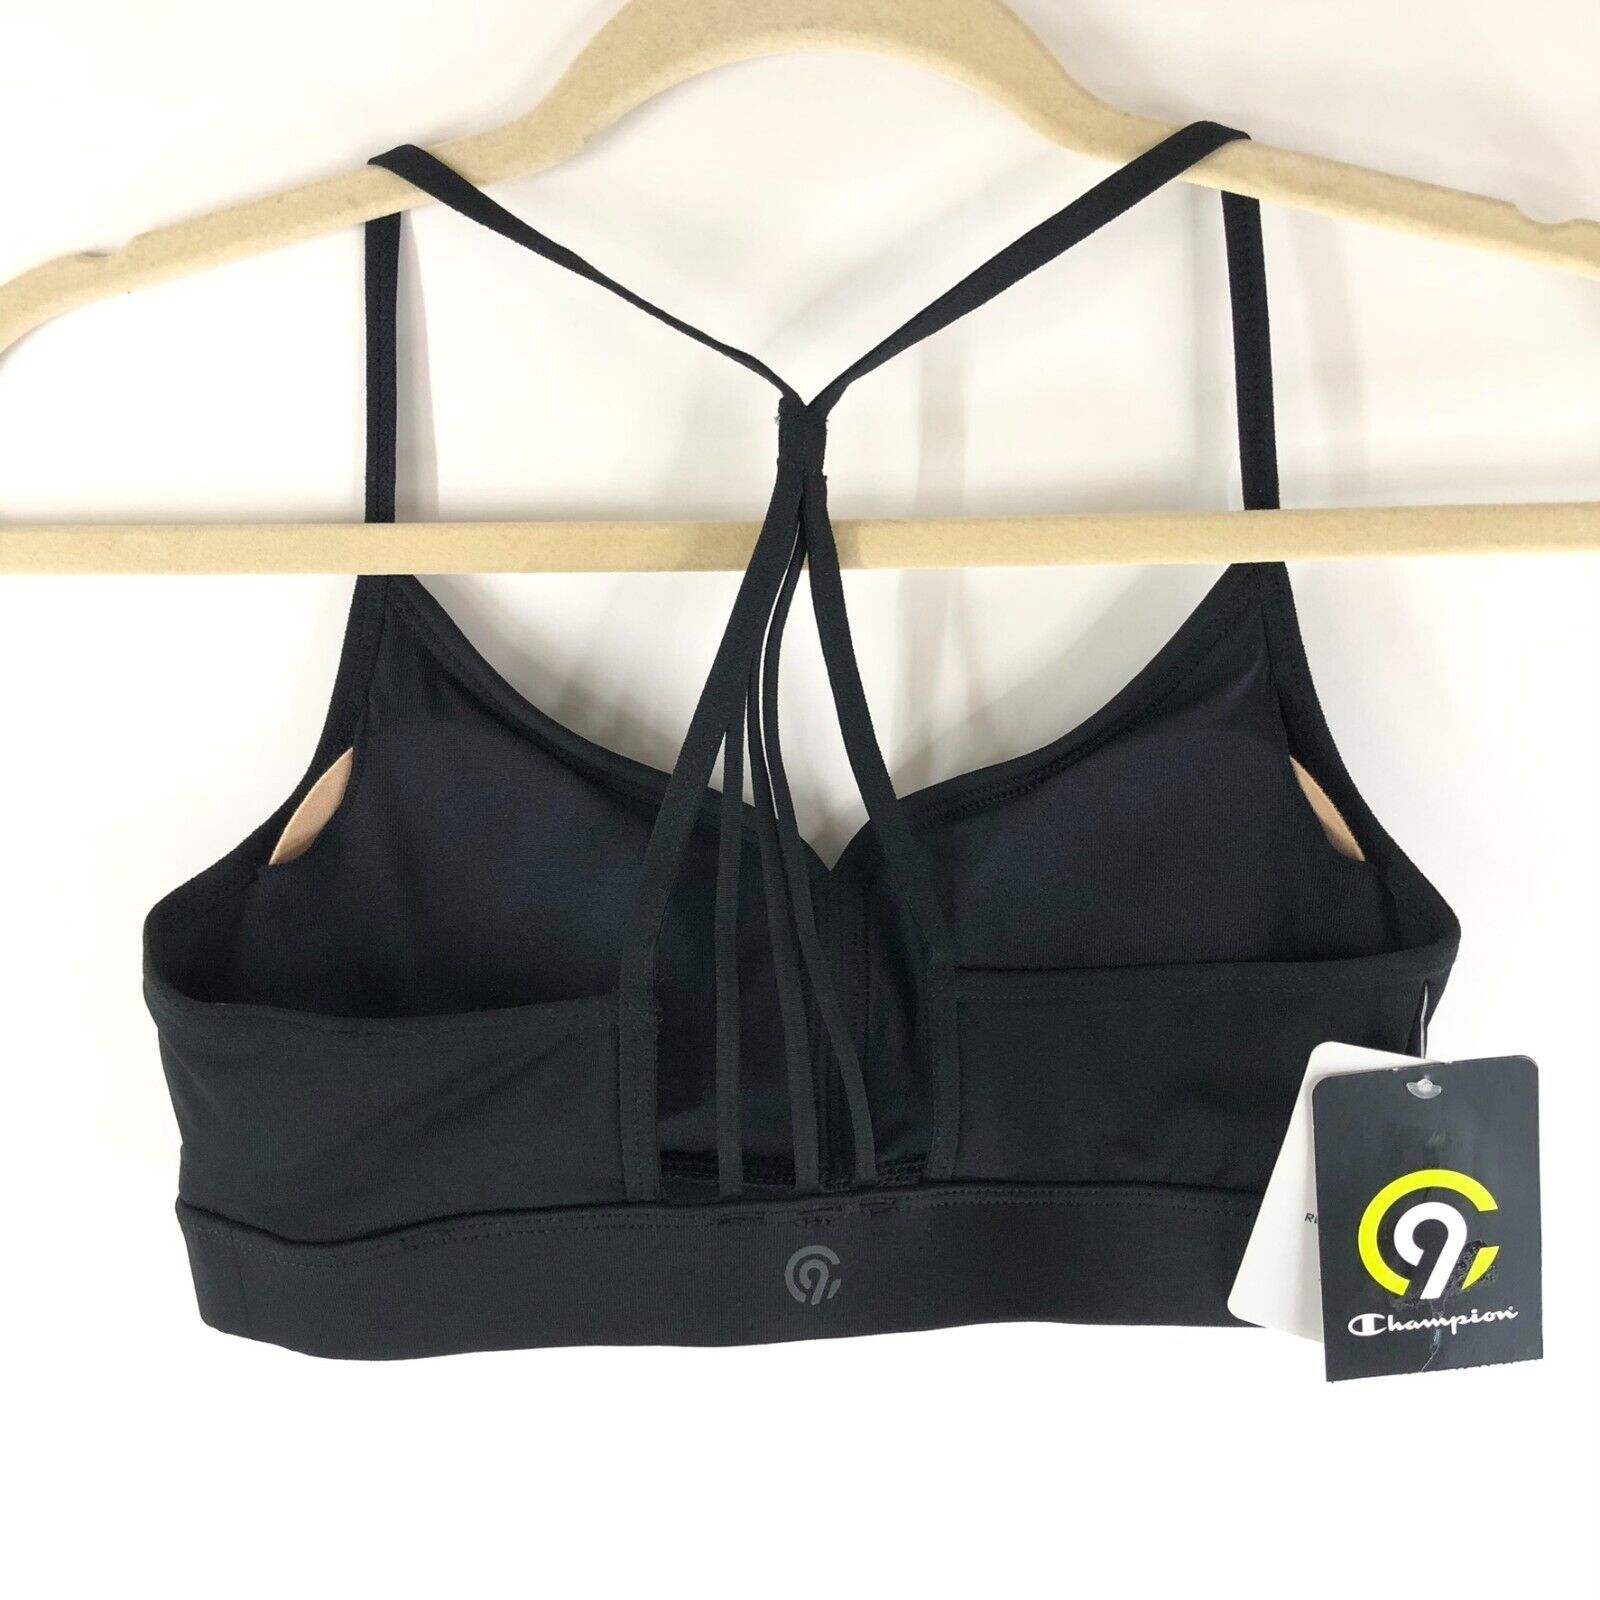 C9 Champion Sports Bra Duo Dry Removable and 50 similar items